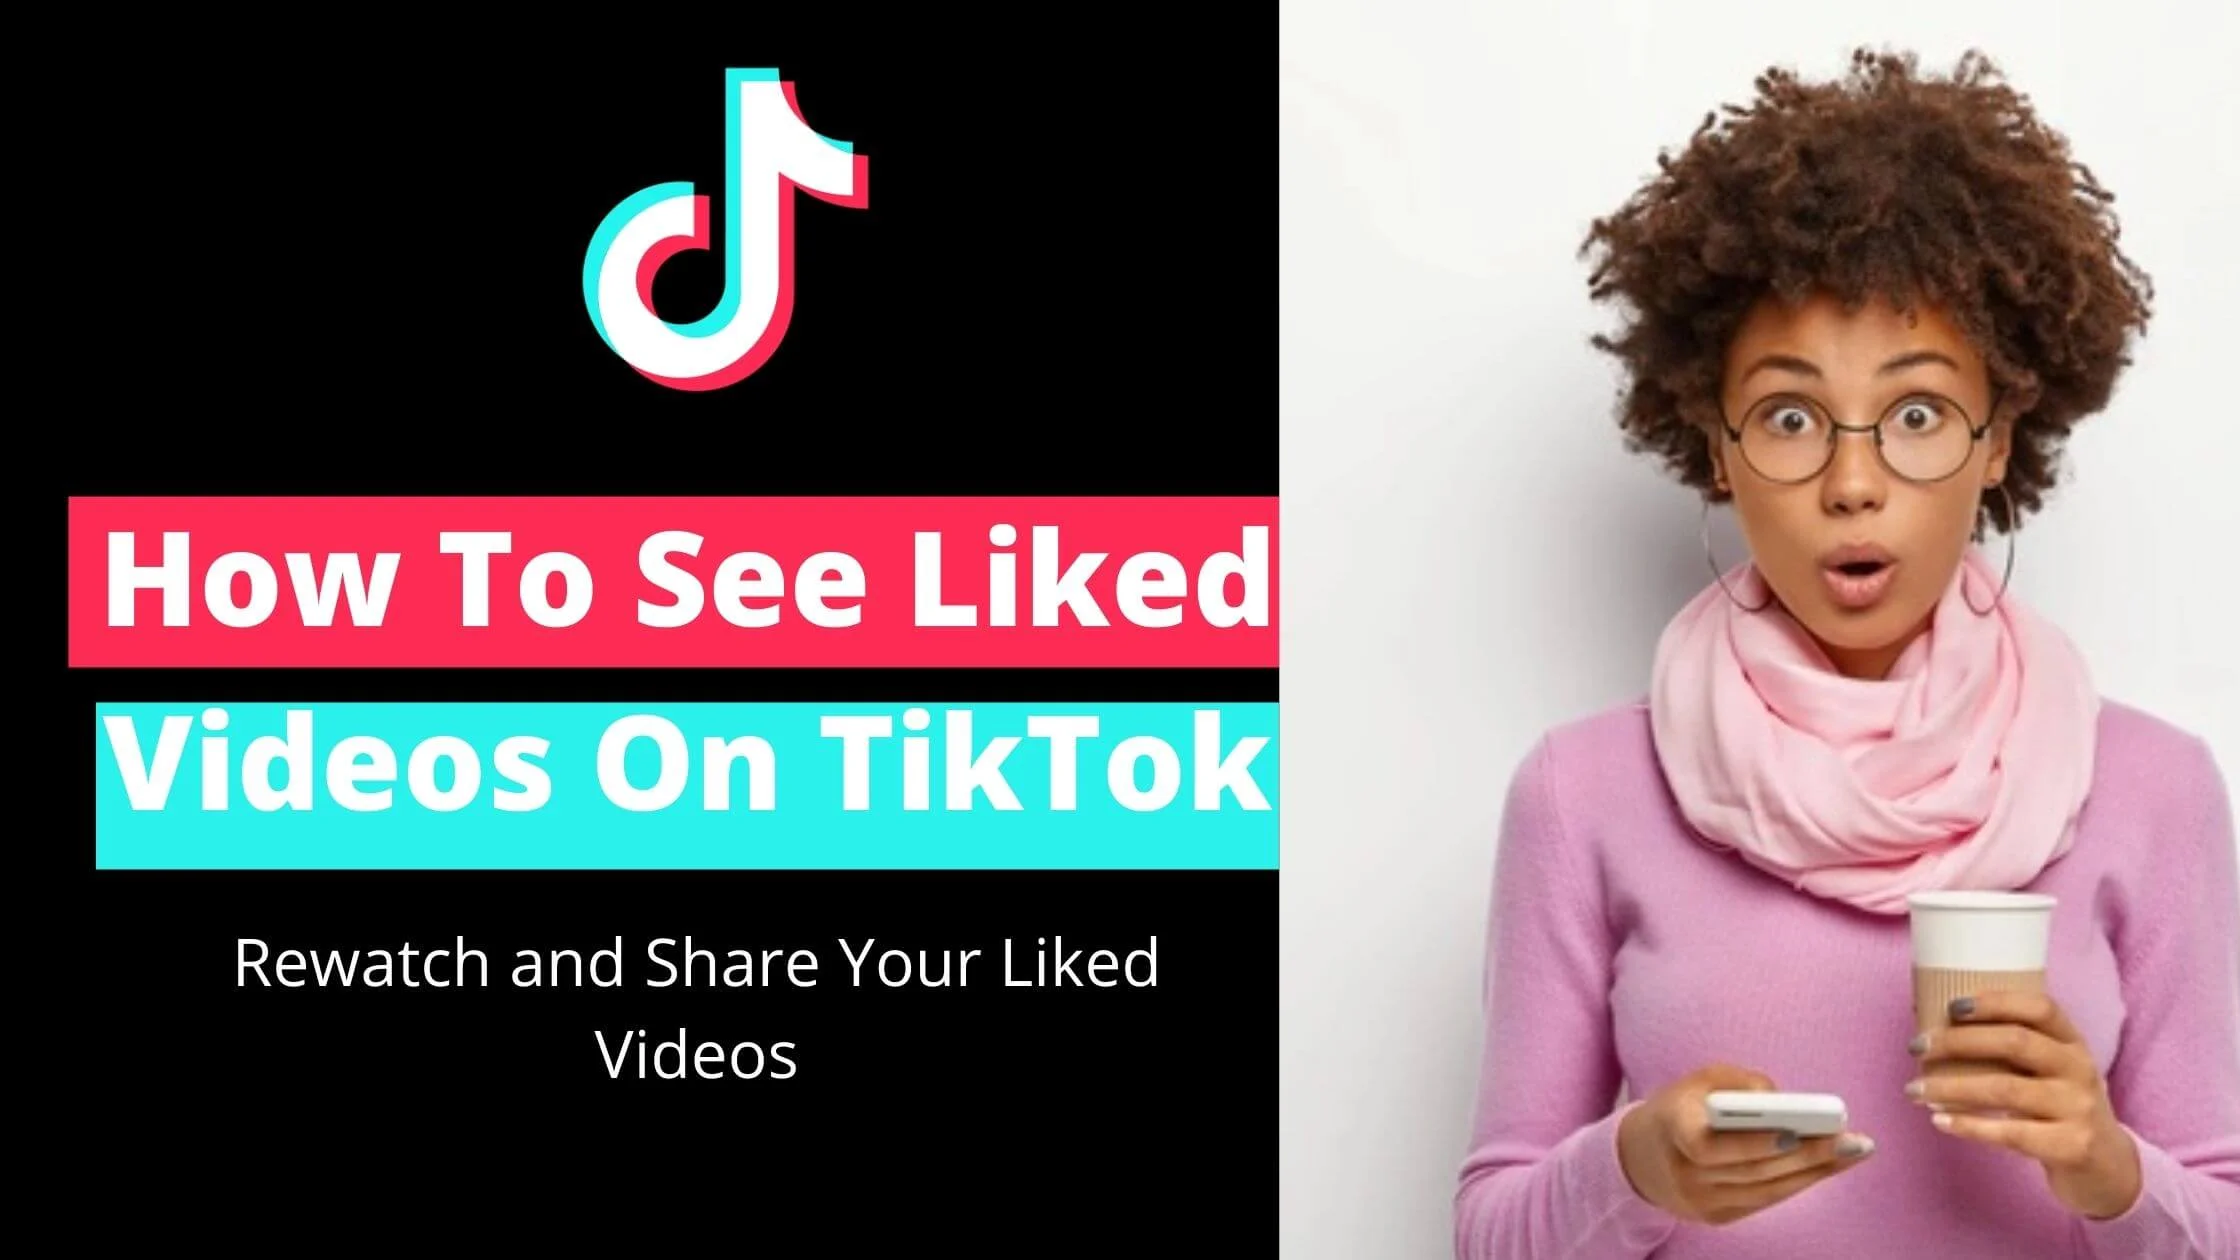 How To See Liked Videos On TikTok